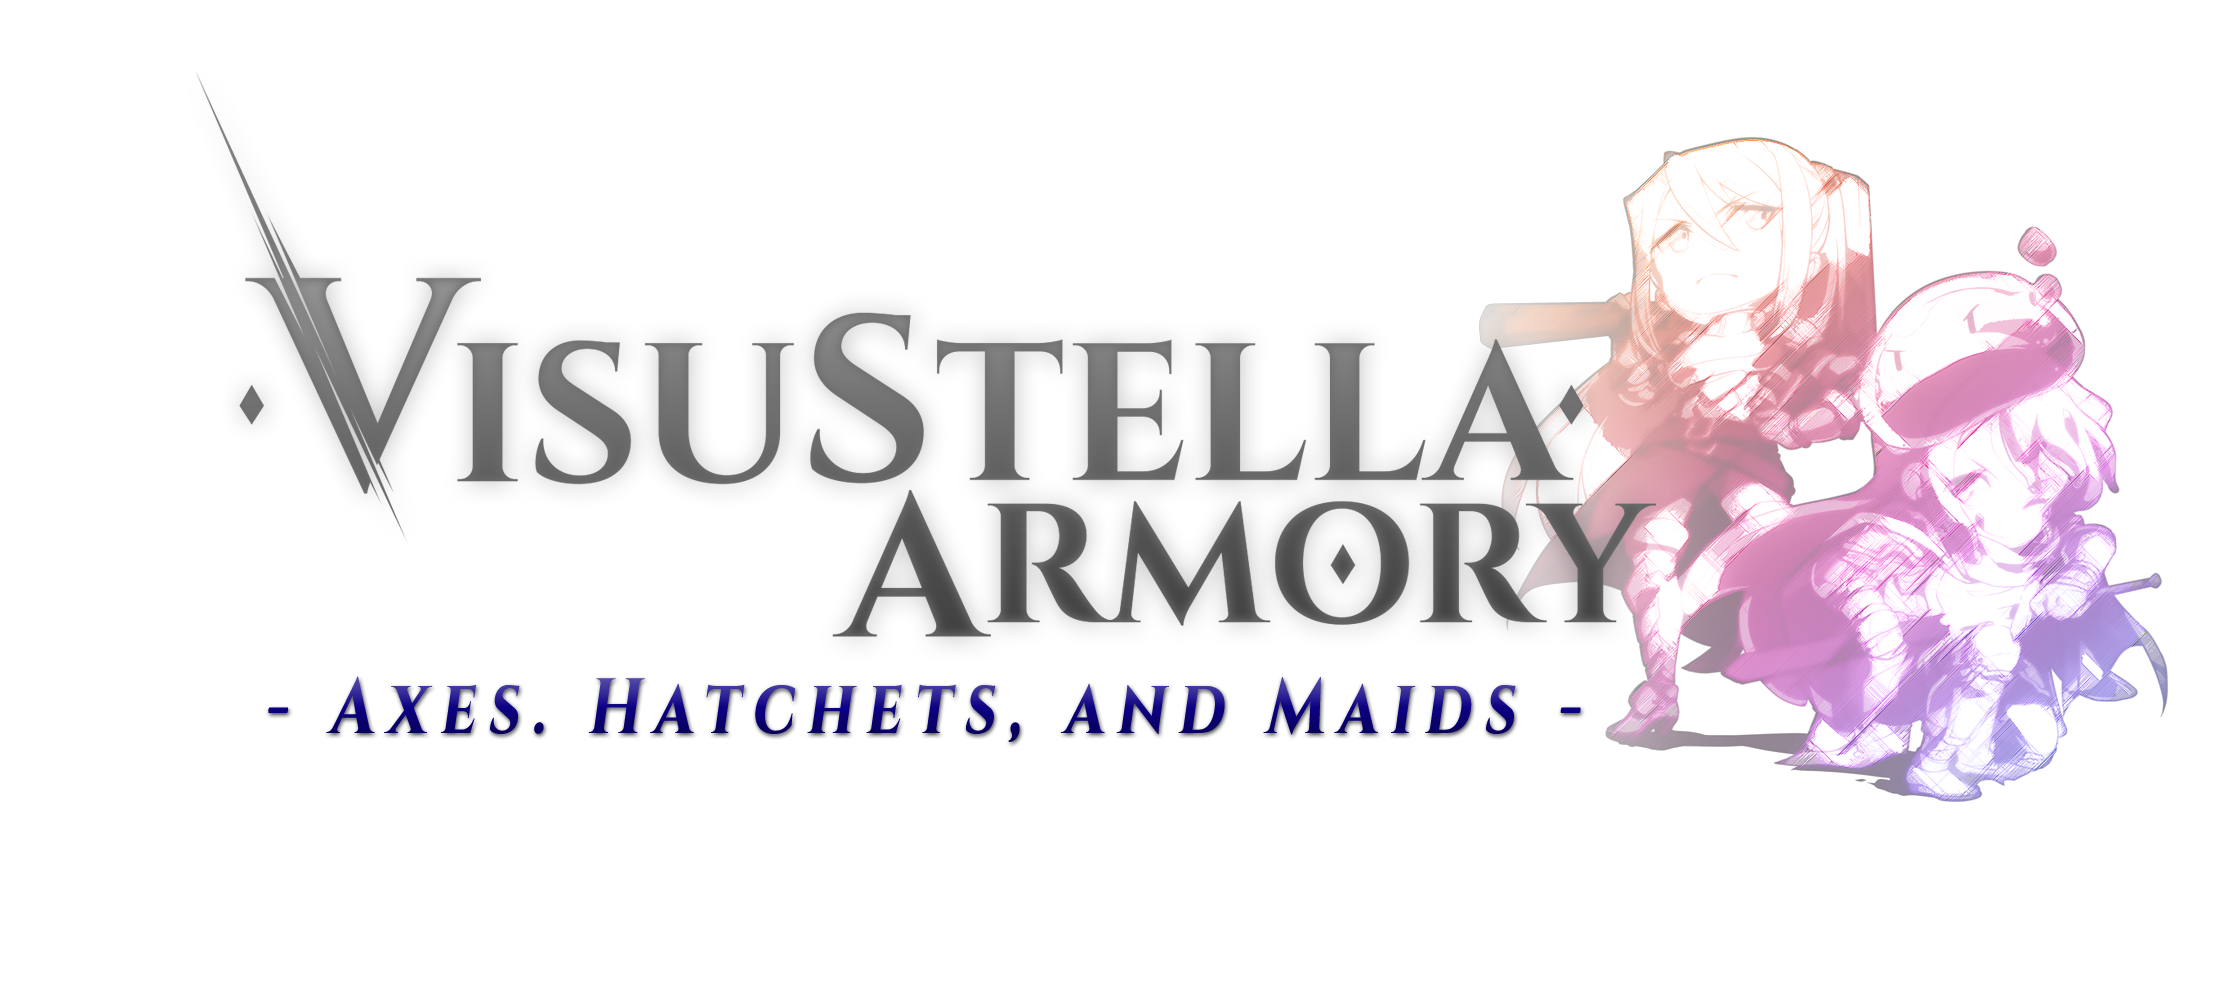 VisuStella Armory: Axes, Hatchets and Maids